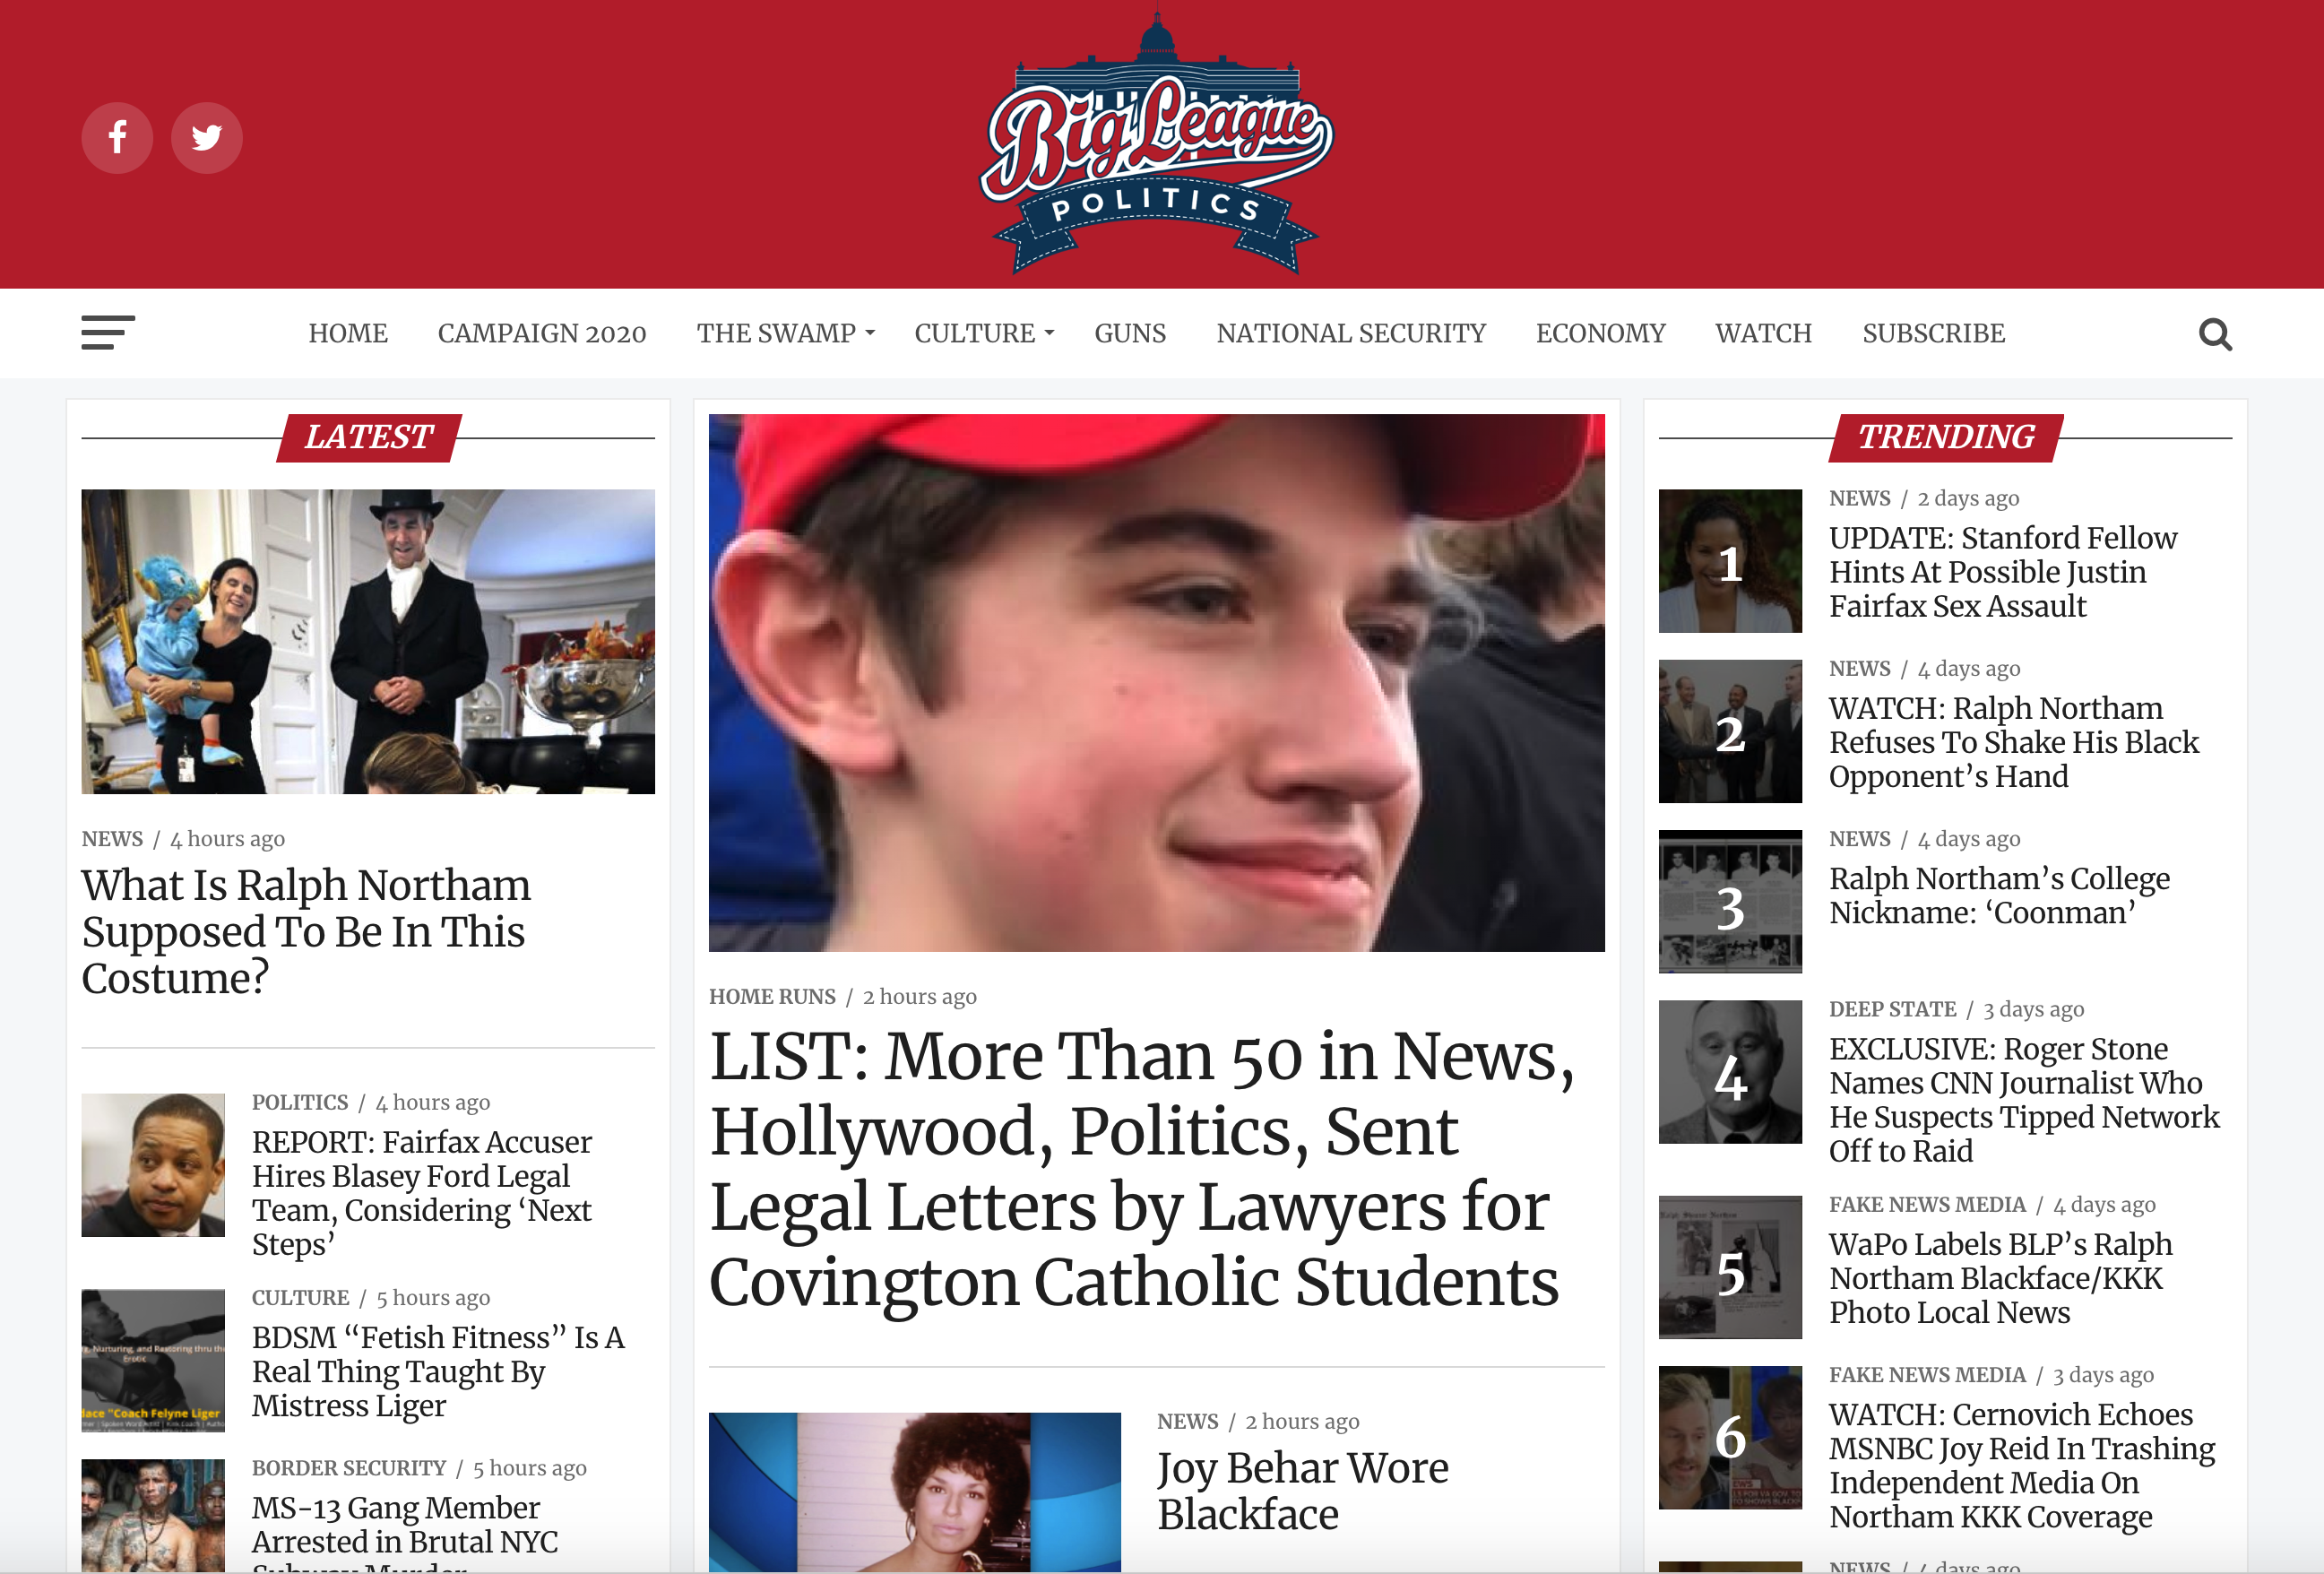 The homepage of Big League Politics on February 5, 2019. The hyper-partisan website was the first to publish unverified sexual assault allegations against Lt. Gov. of Virginia Justin Fairfax